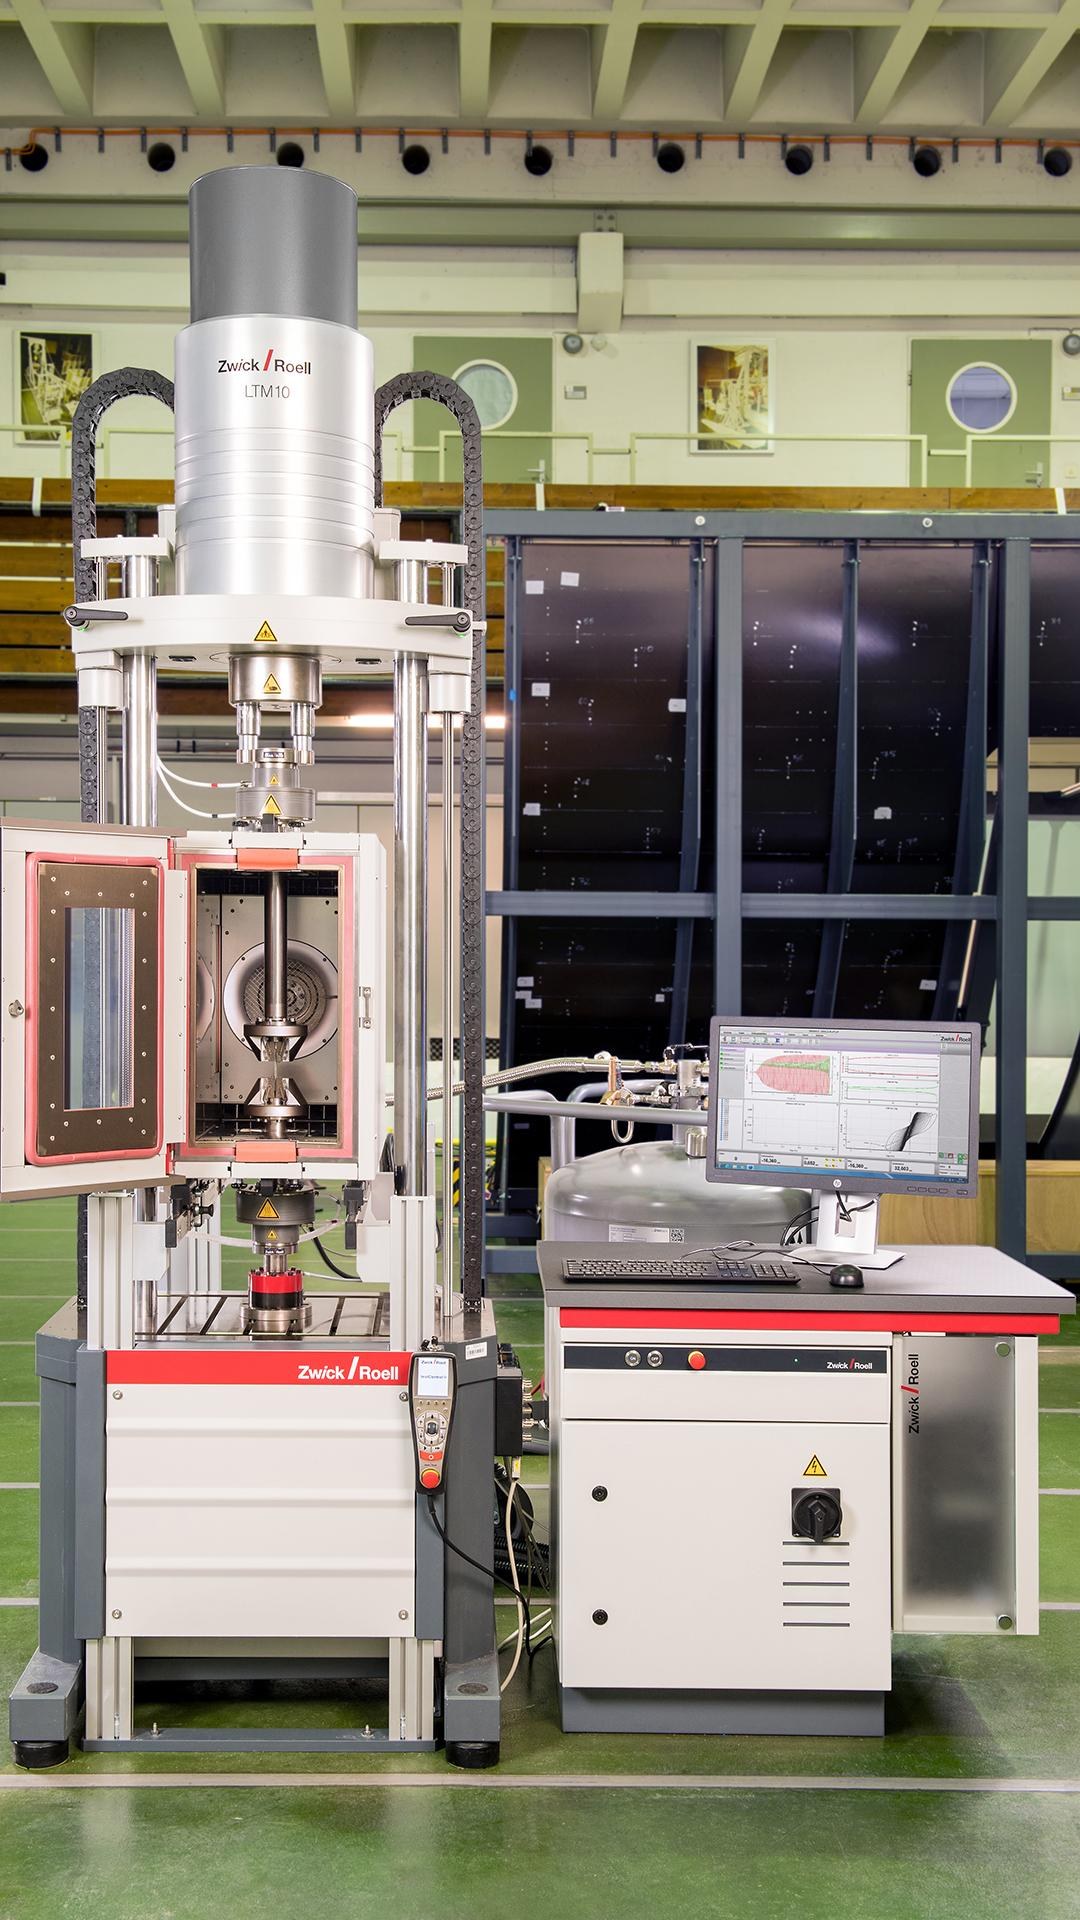 Electrodynamic machine for testing material fatigue properties